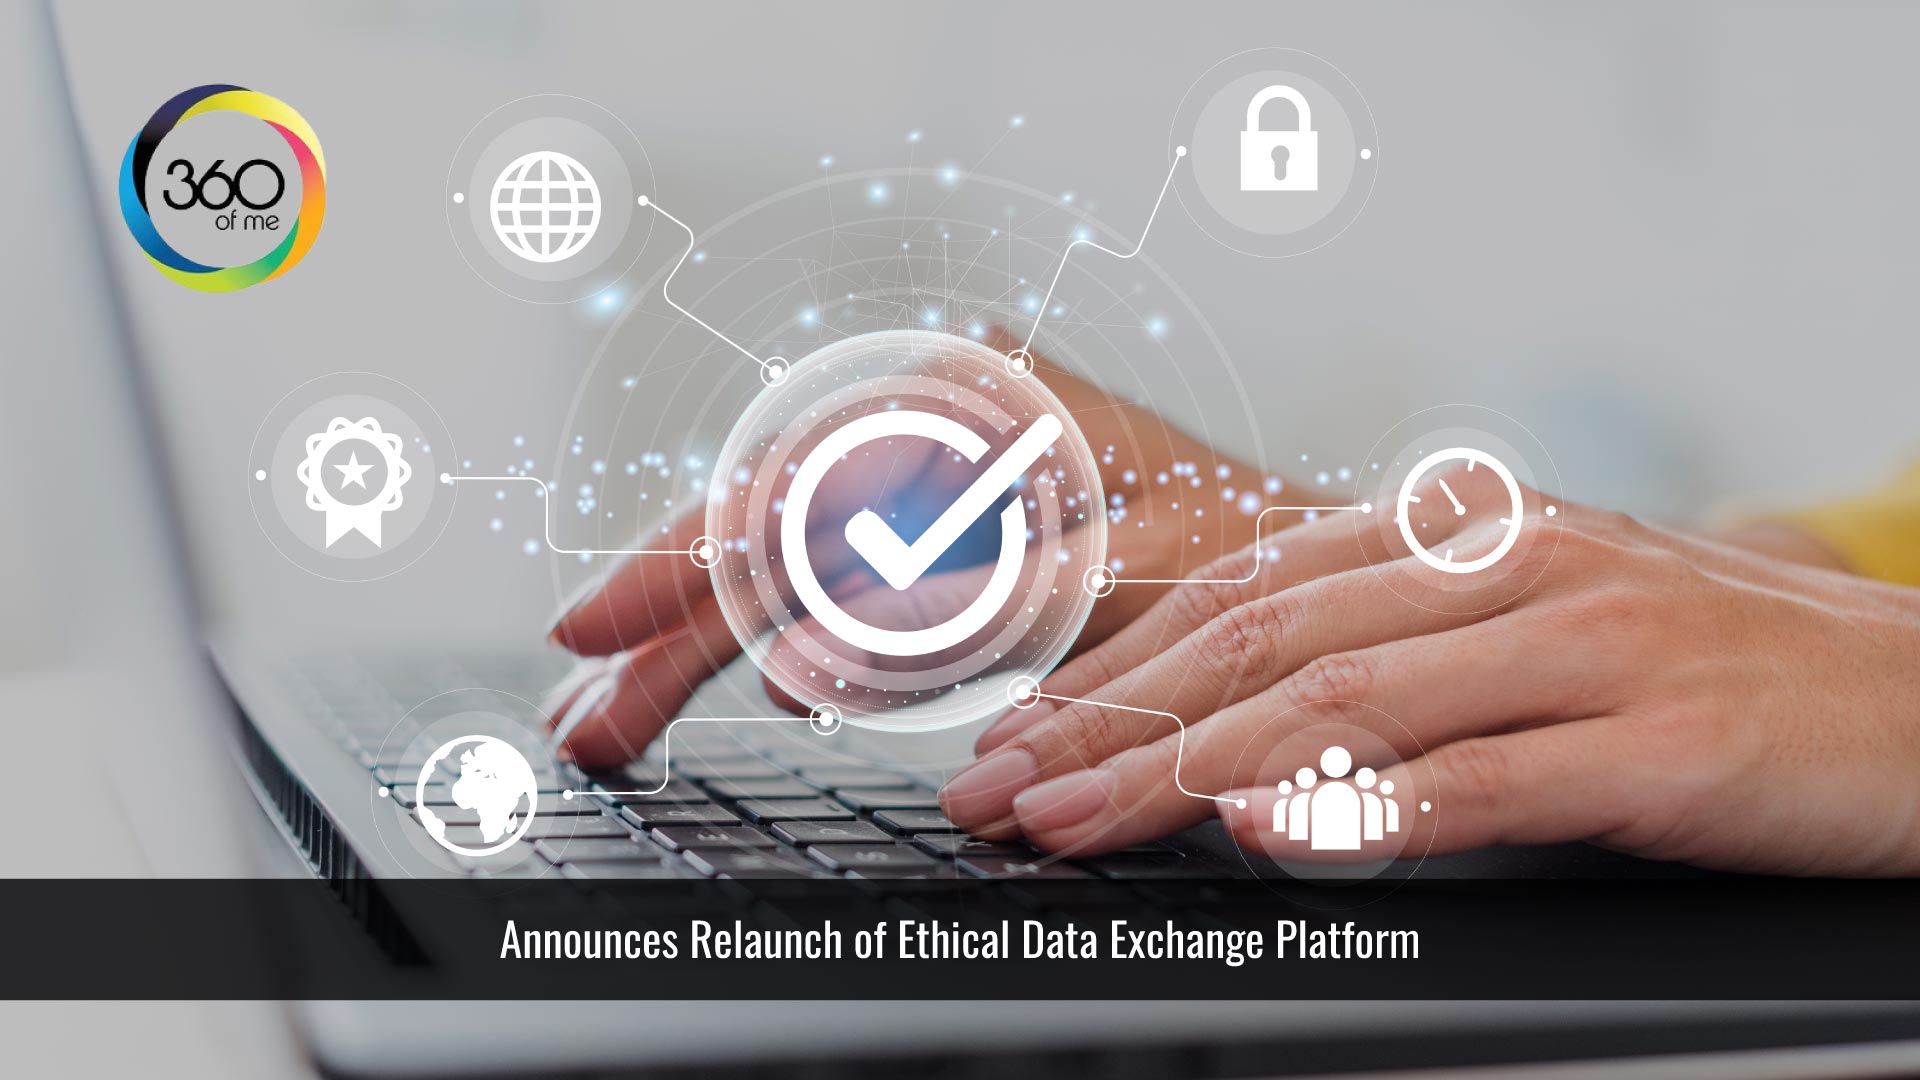 360ofme Announces Relaunch of Ethical Data Exchange Platform with New Capabilities Ensuring Data Privacy and Security